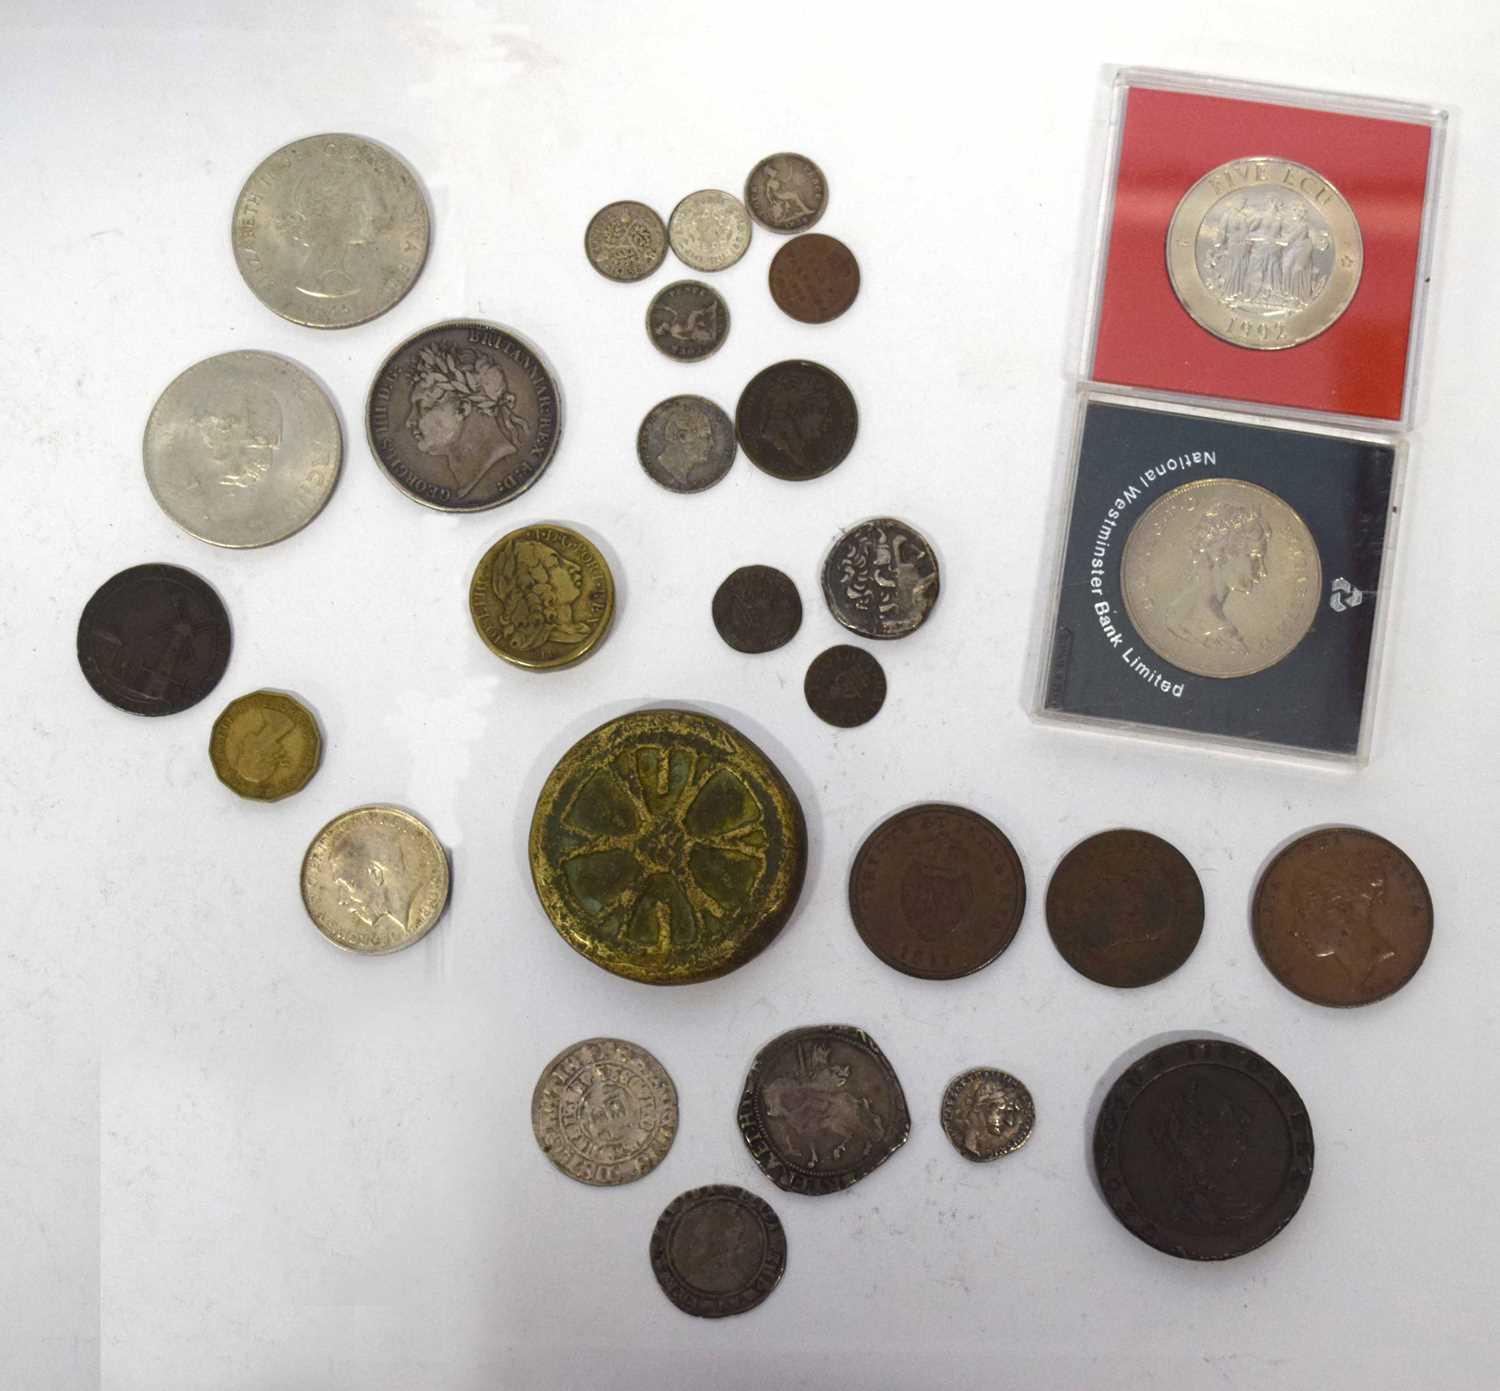 Assortment of coins to include Elizabeth I 1574 sixpence, George IV 1821 crown, William IV 1836